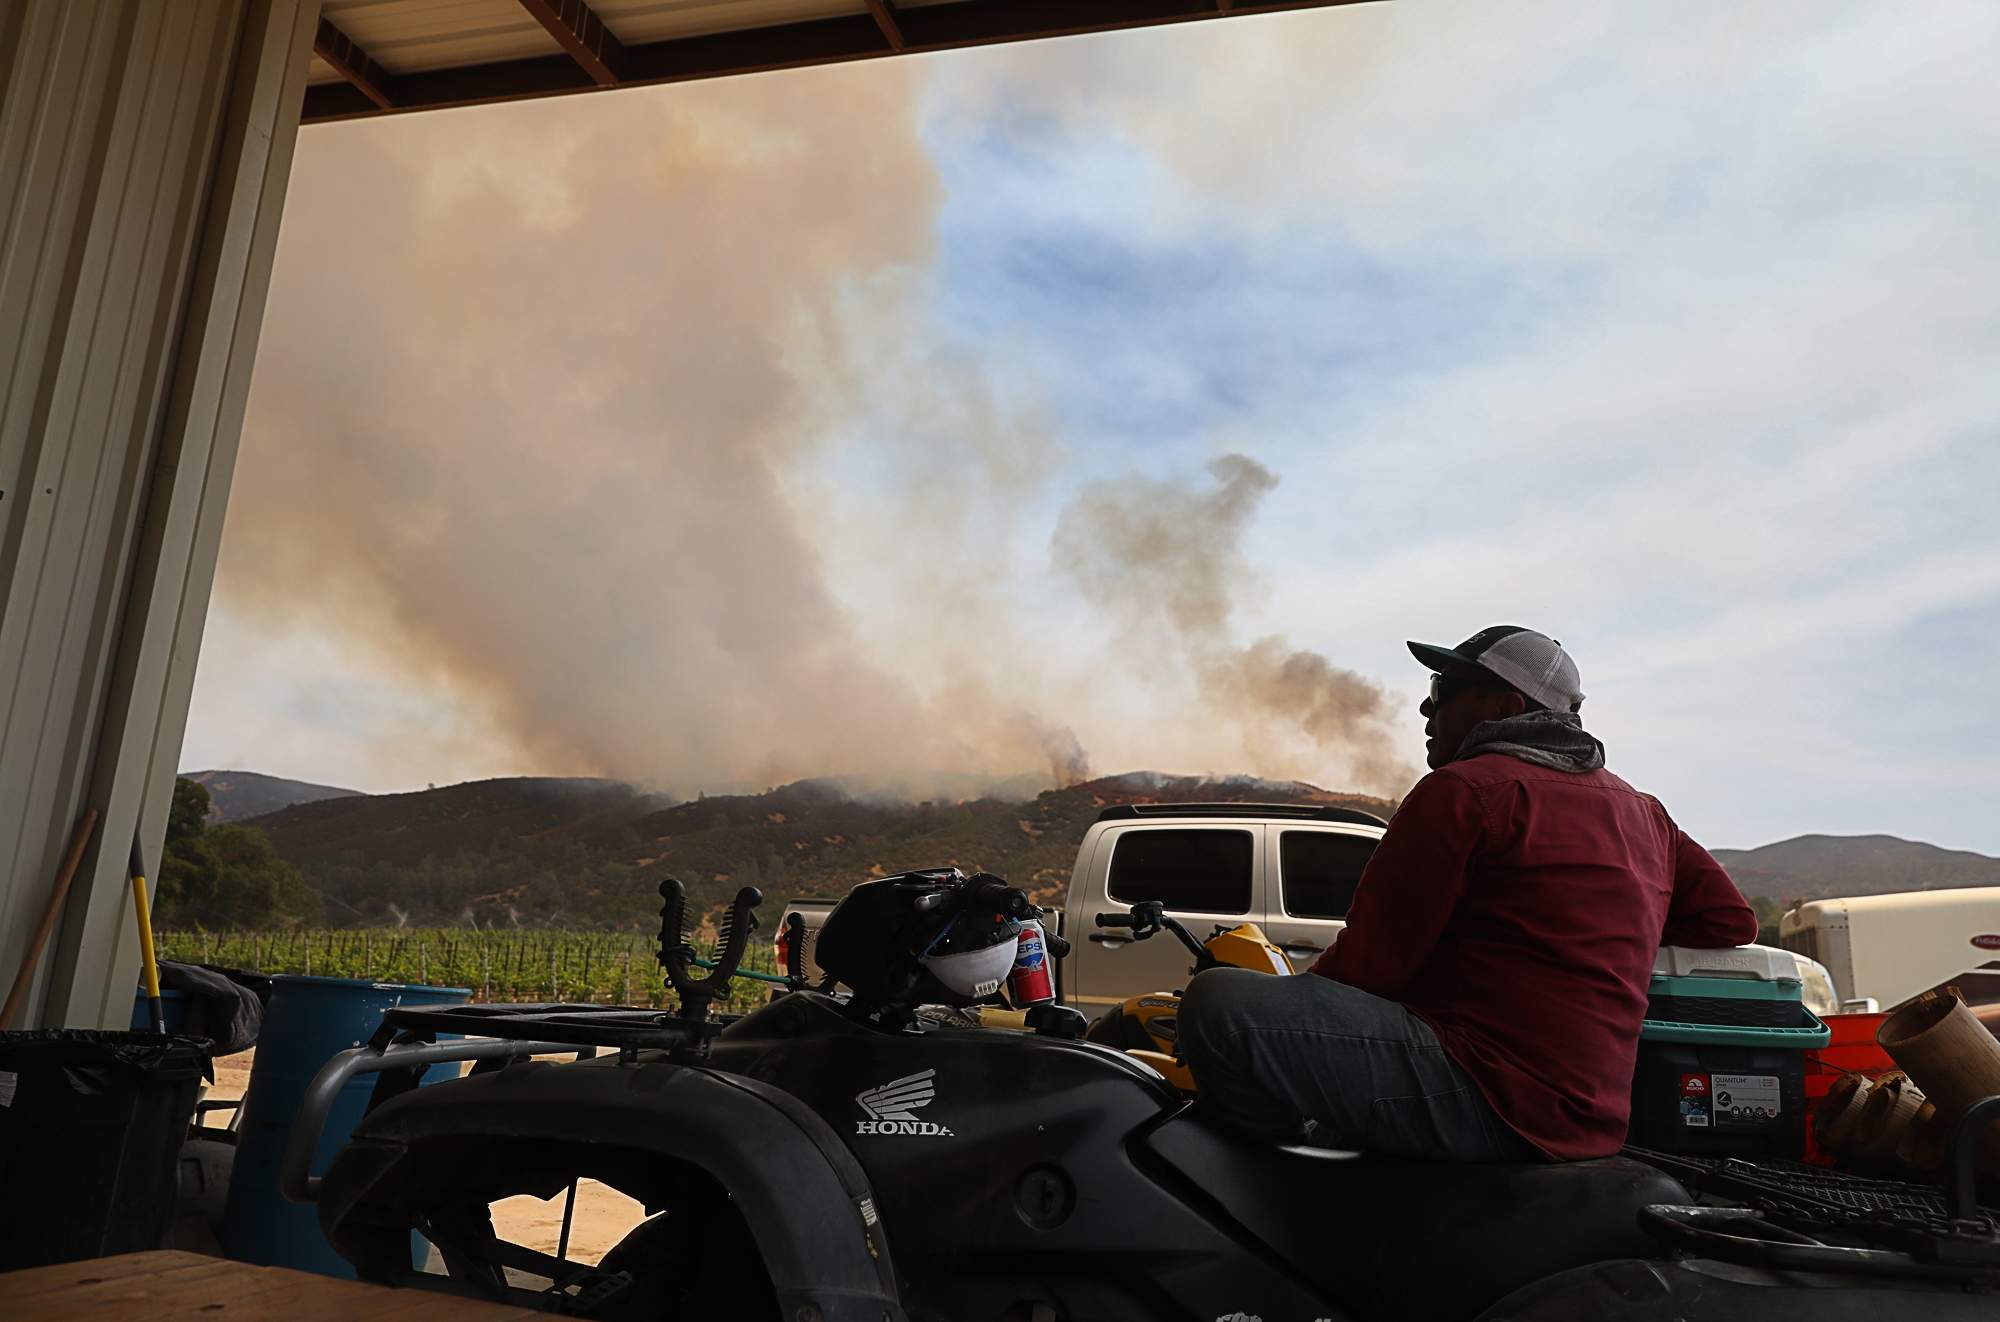 Hilario Reys watches the Pawnee Fire burn from Cache Creek Vineyards, in the Spring Valley community east of Clearlake Oaks on Tuesday, June 26, 2018. (Christopher Chung/ The Press Democrat)